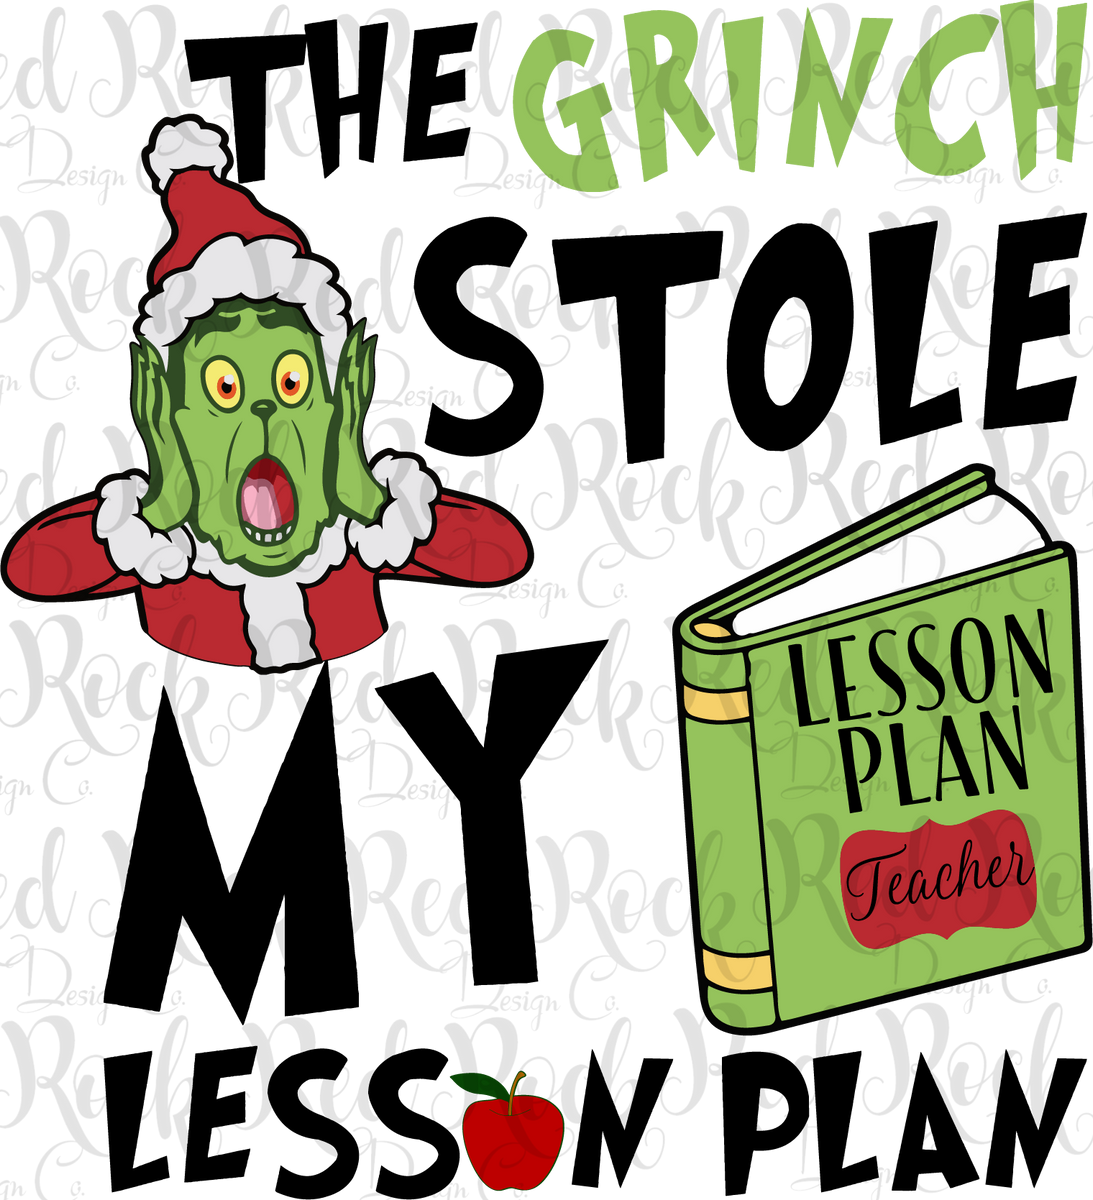 Grinch stole my lesson plan – Red Rock Design Co.